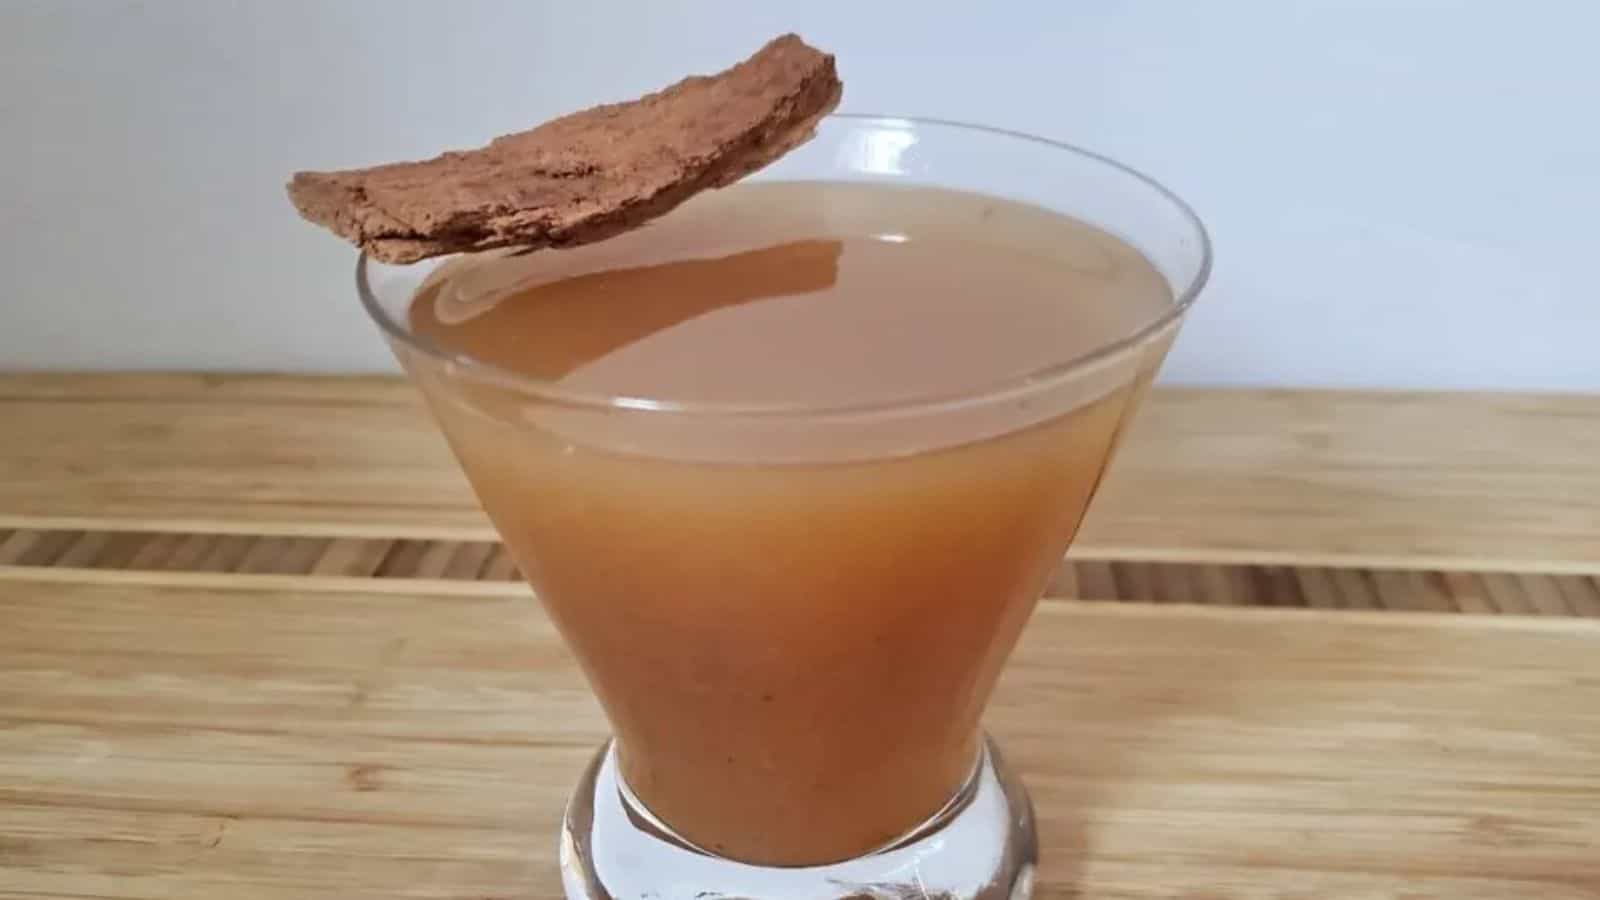 Image shows a glass with a hot apple cider cocktail with a cinnamon stick across the top.